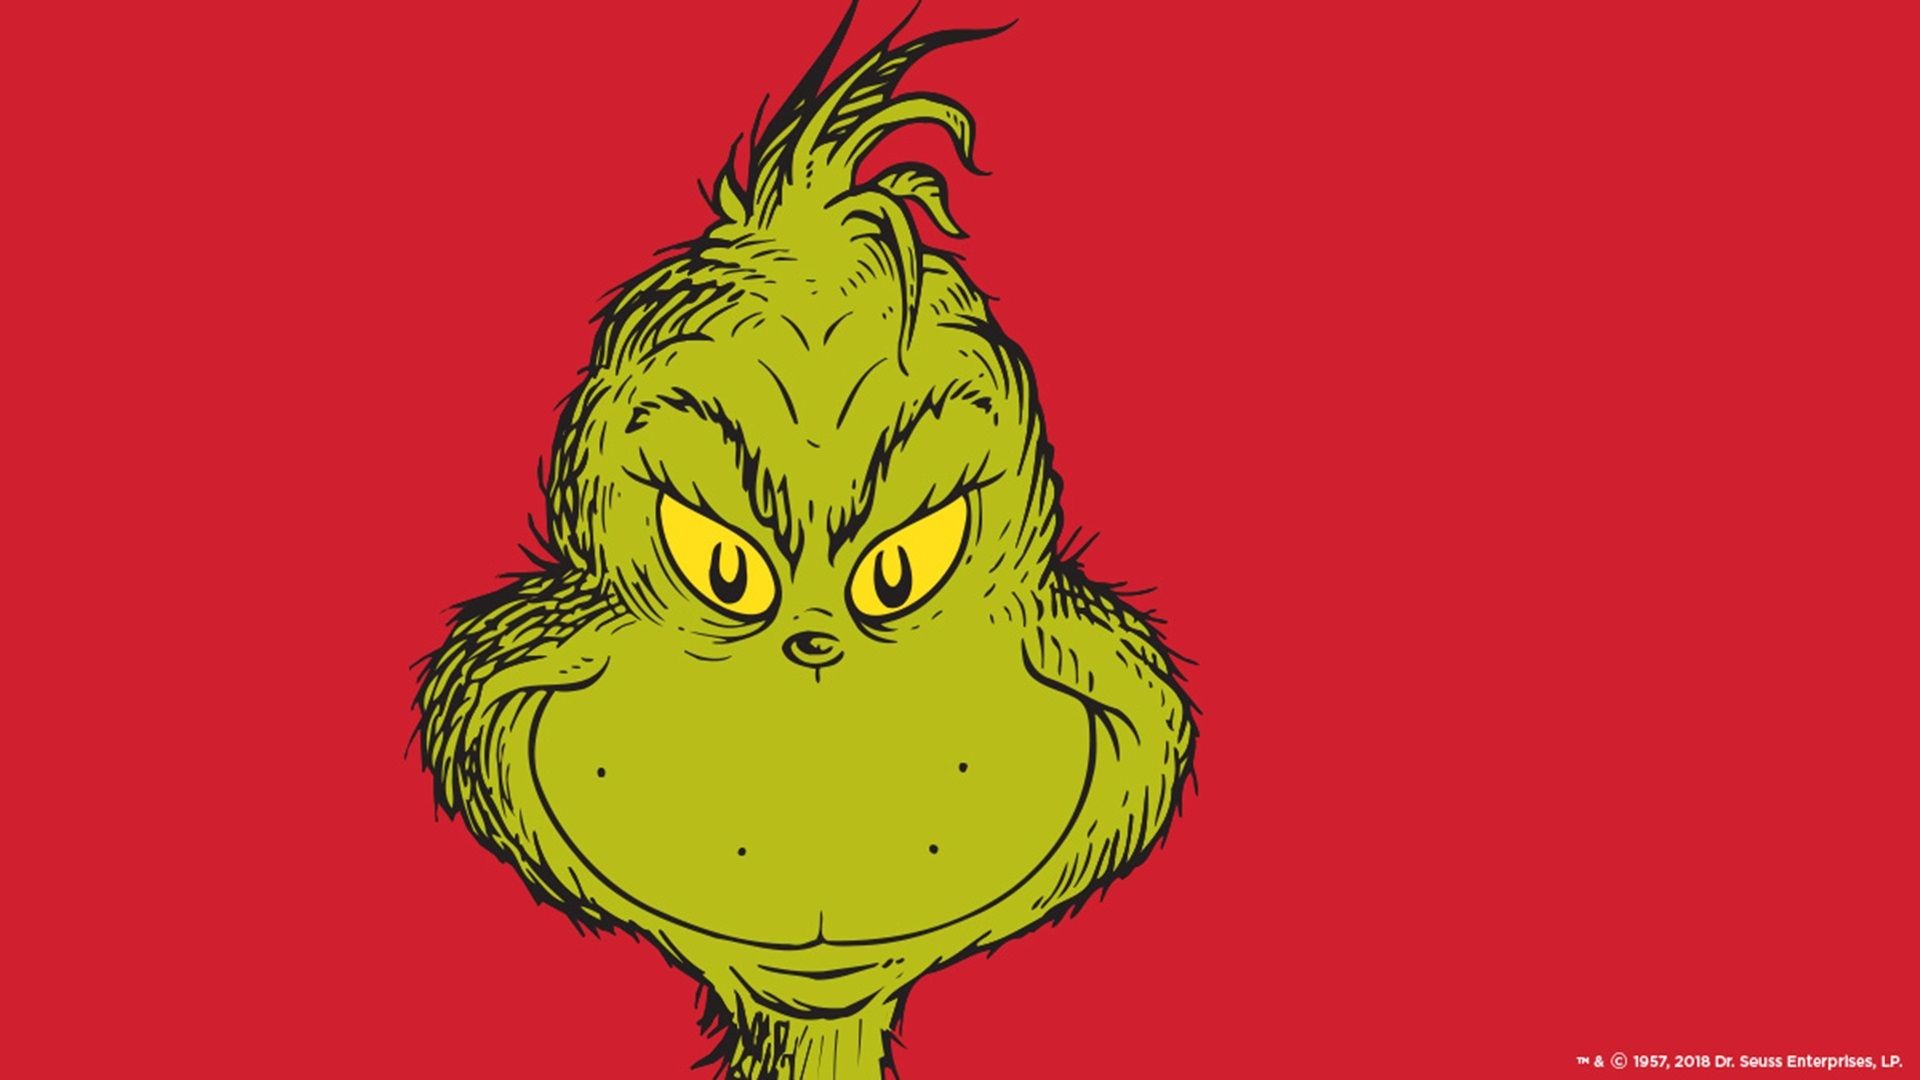 The Grinch Wallpapers Wallpaper - Grinch Stole Christmas , HD Wallpaper & Backgrounds